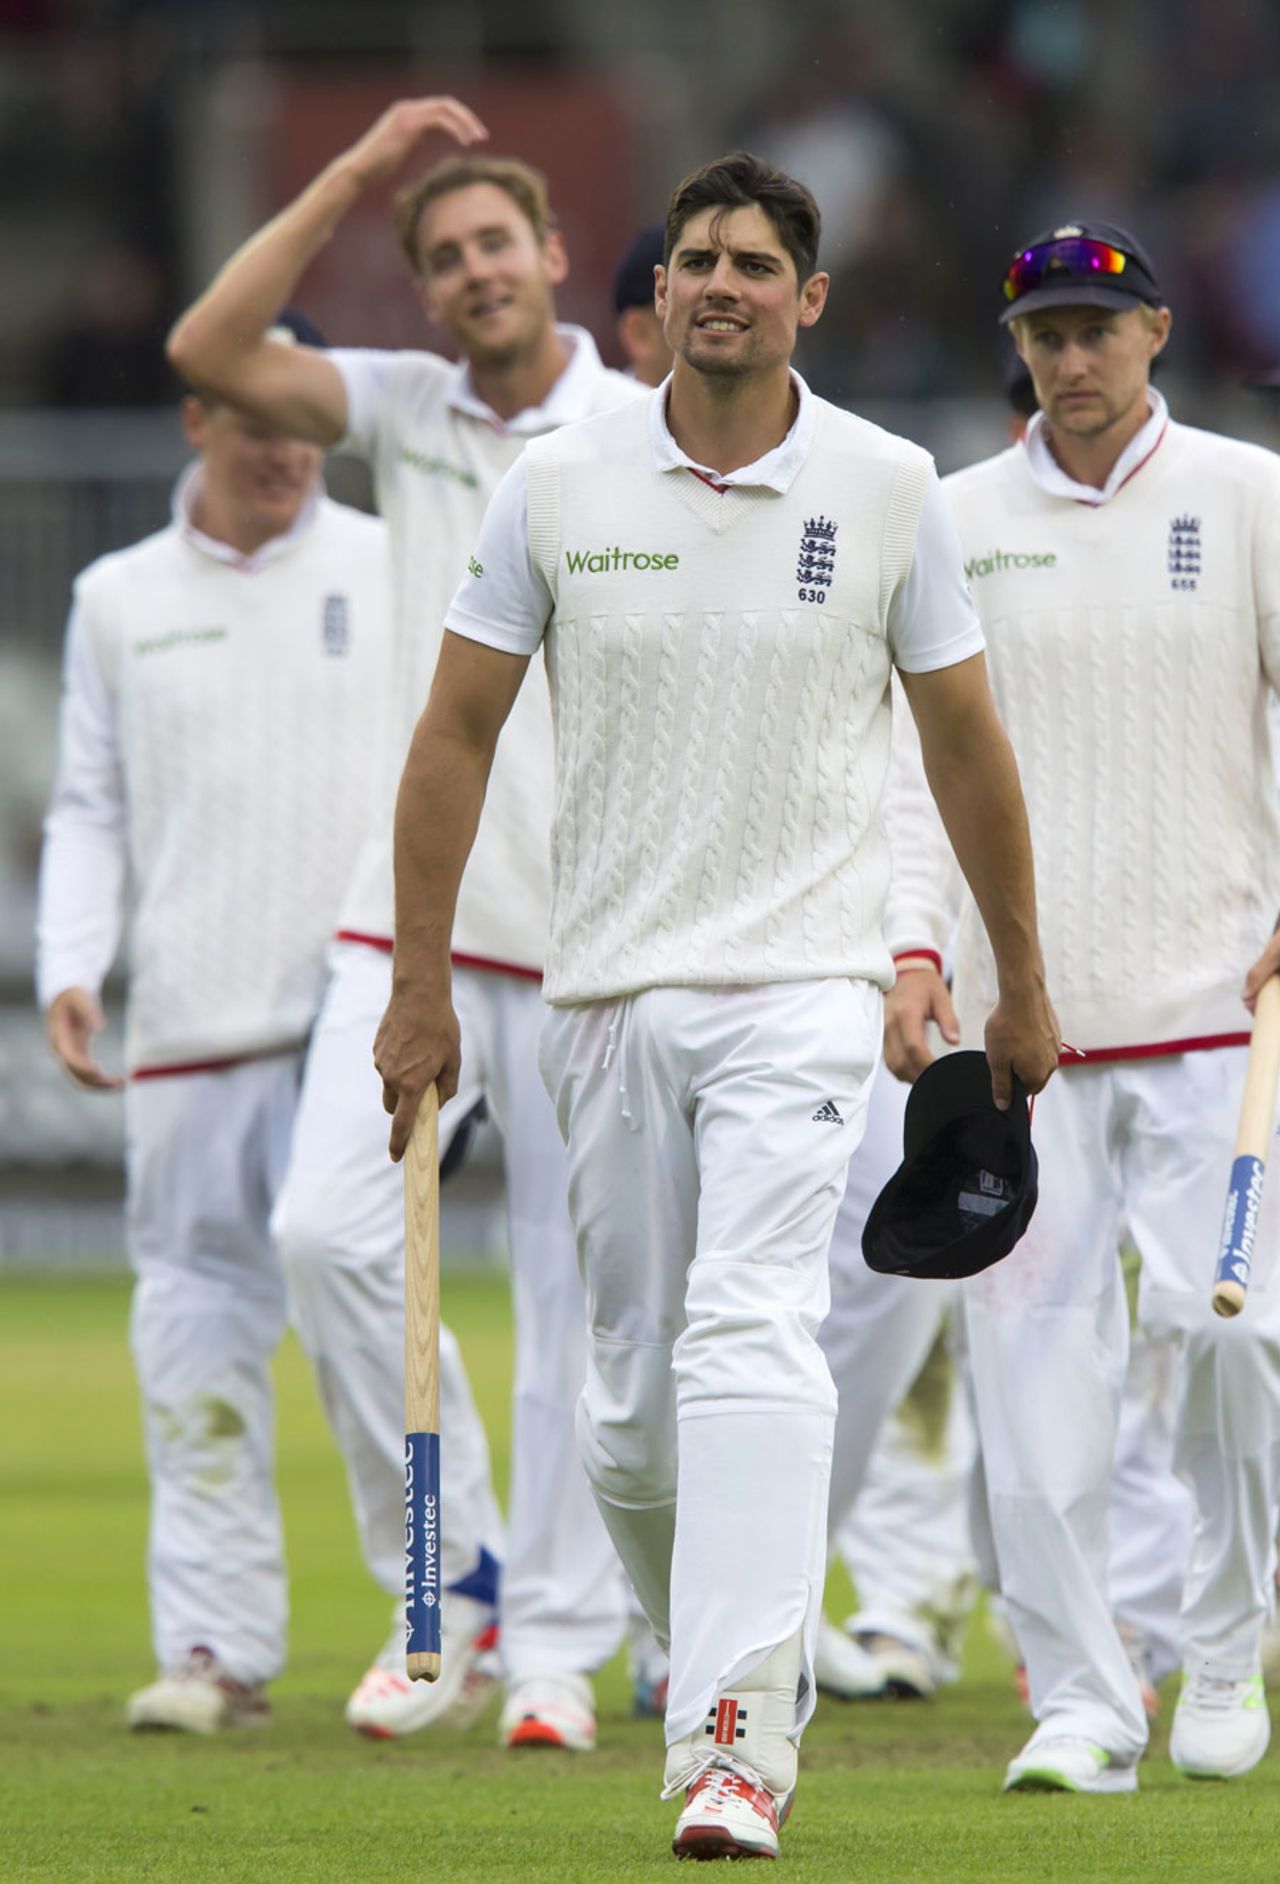 Alastair Cook leads his team off after victory levelled the series, England v Pakistan, 2nd Investec Test, Old Trafford, 4th day, July 25, 2016